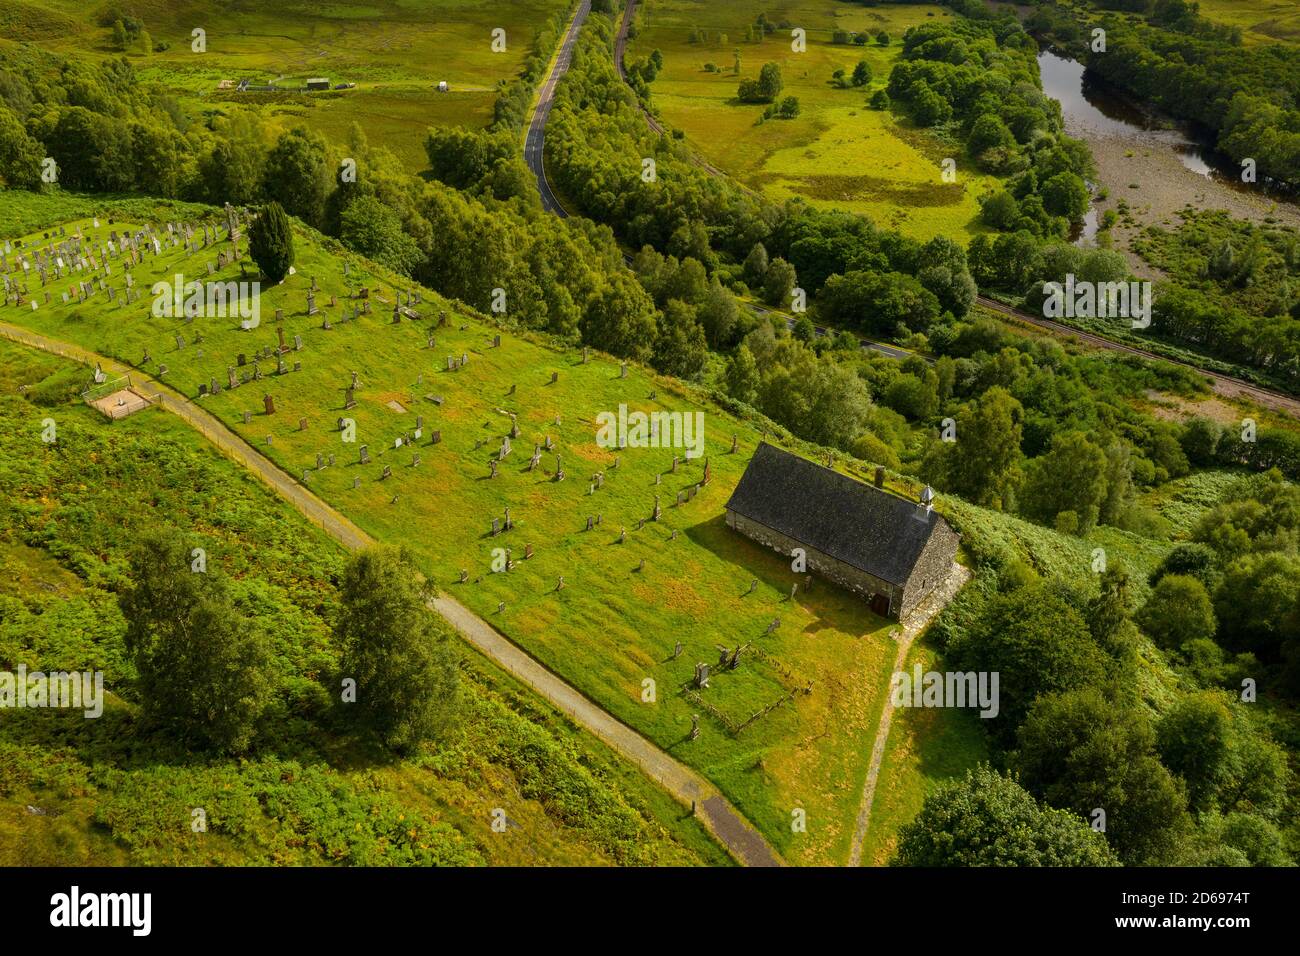 An aerial view of Cille Choirill, which is a 15th-century Roman Catholic church situated in Glen Spean in Lochaber, Scotland. Stock Photo